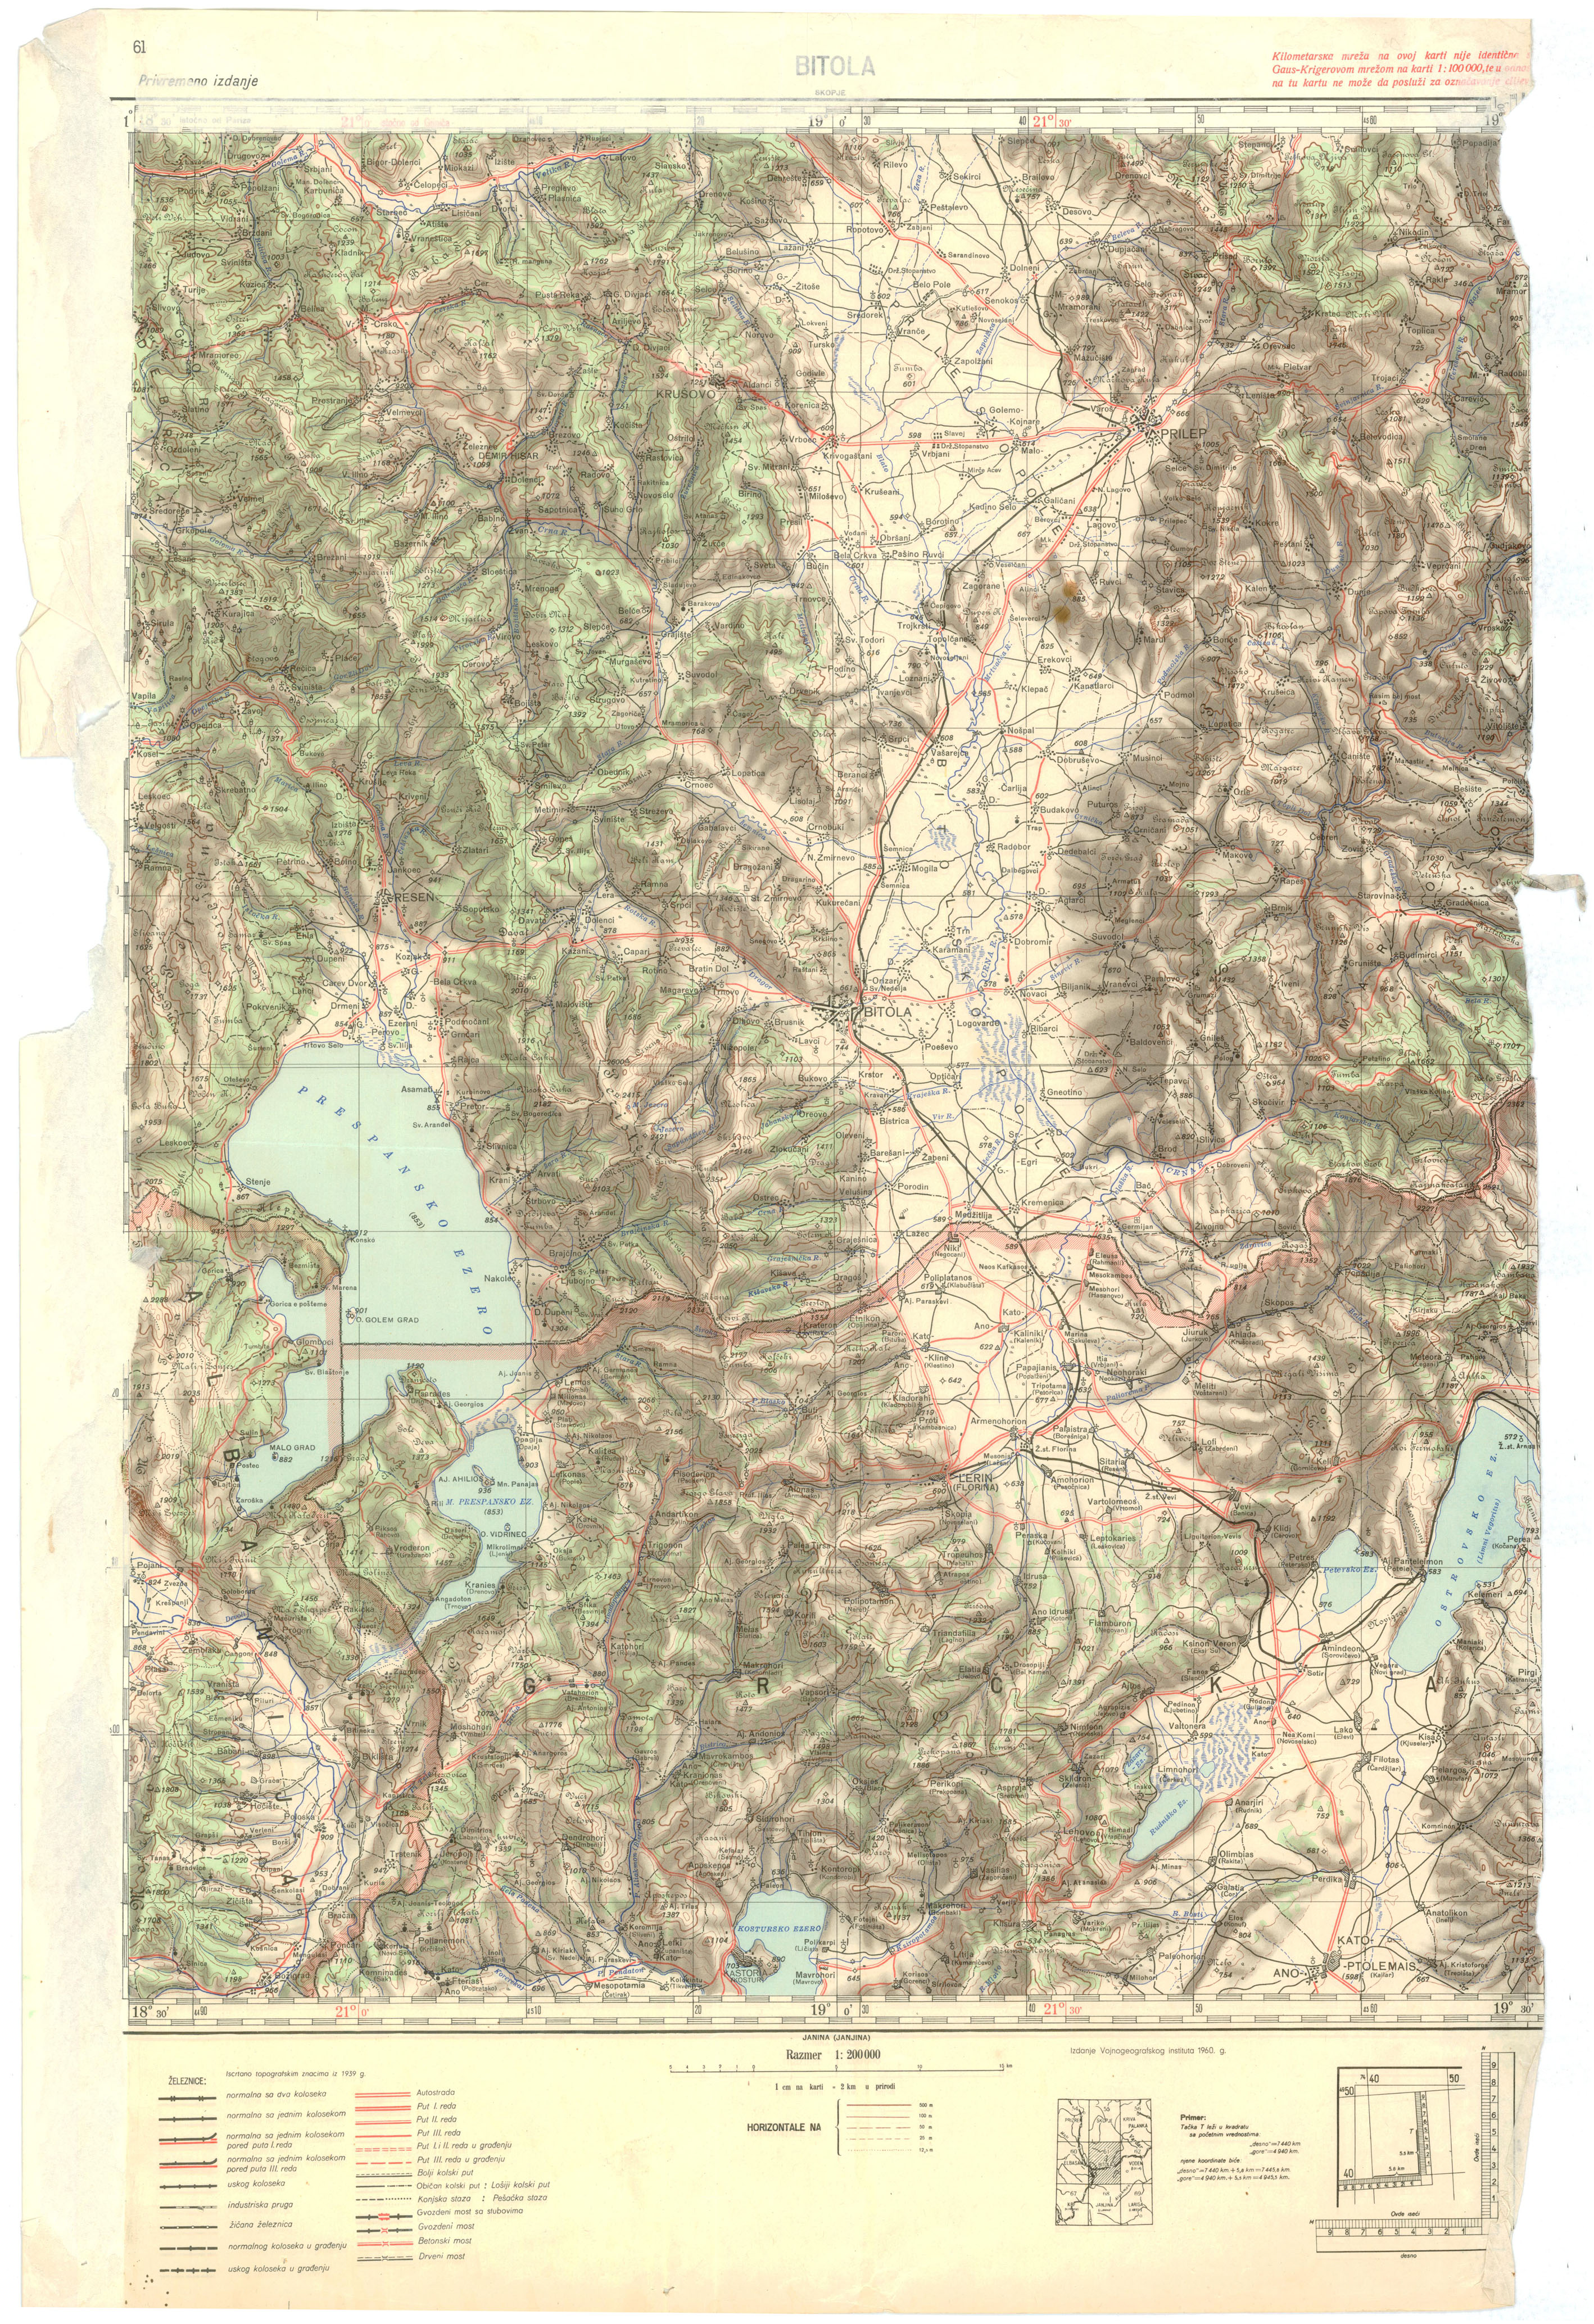 http://www.pollitecon.com/html/reprints/assets/Detailed_Topographical_Map_of_Macedonia_And_Surrounds_Bitola_Region.jpg